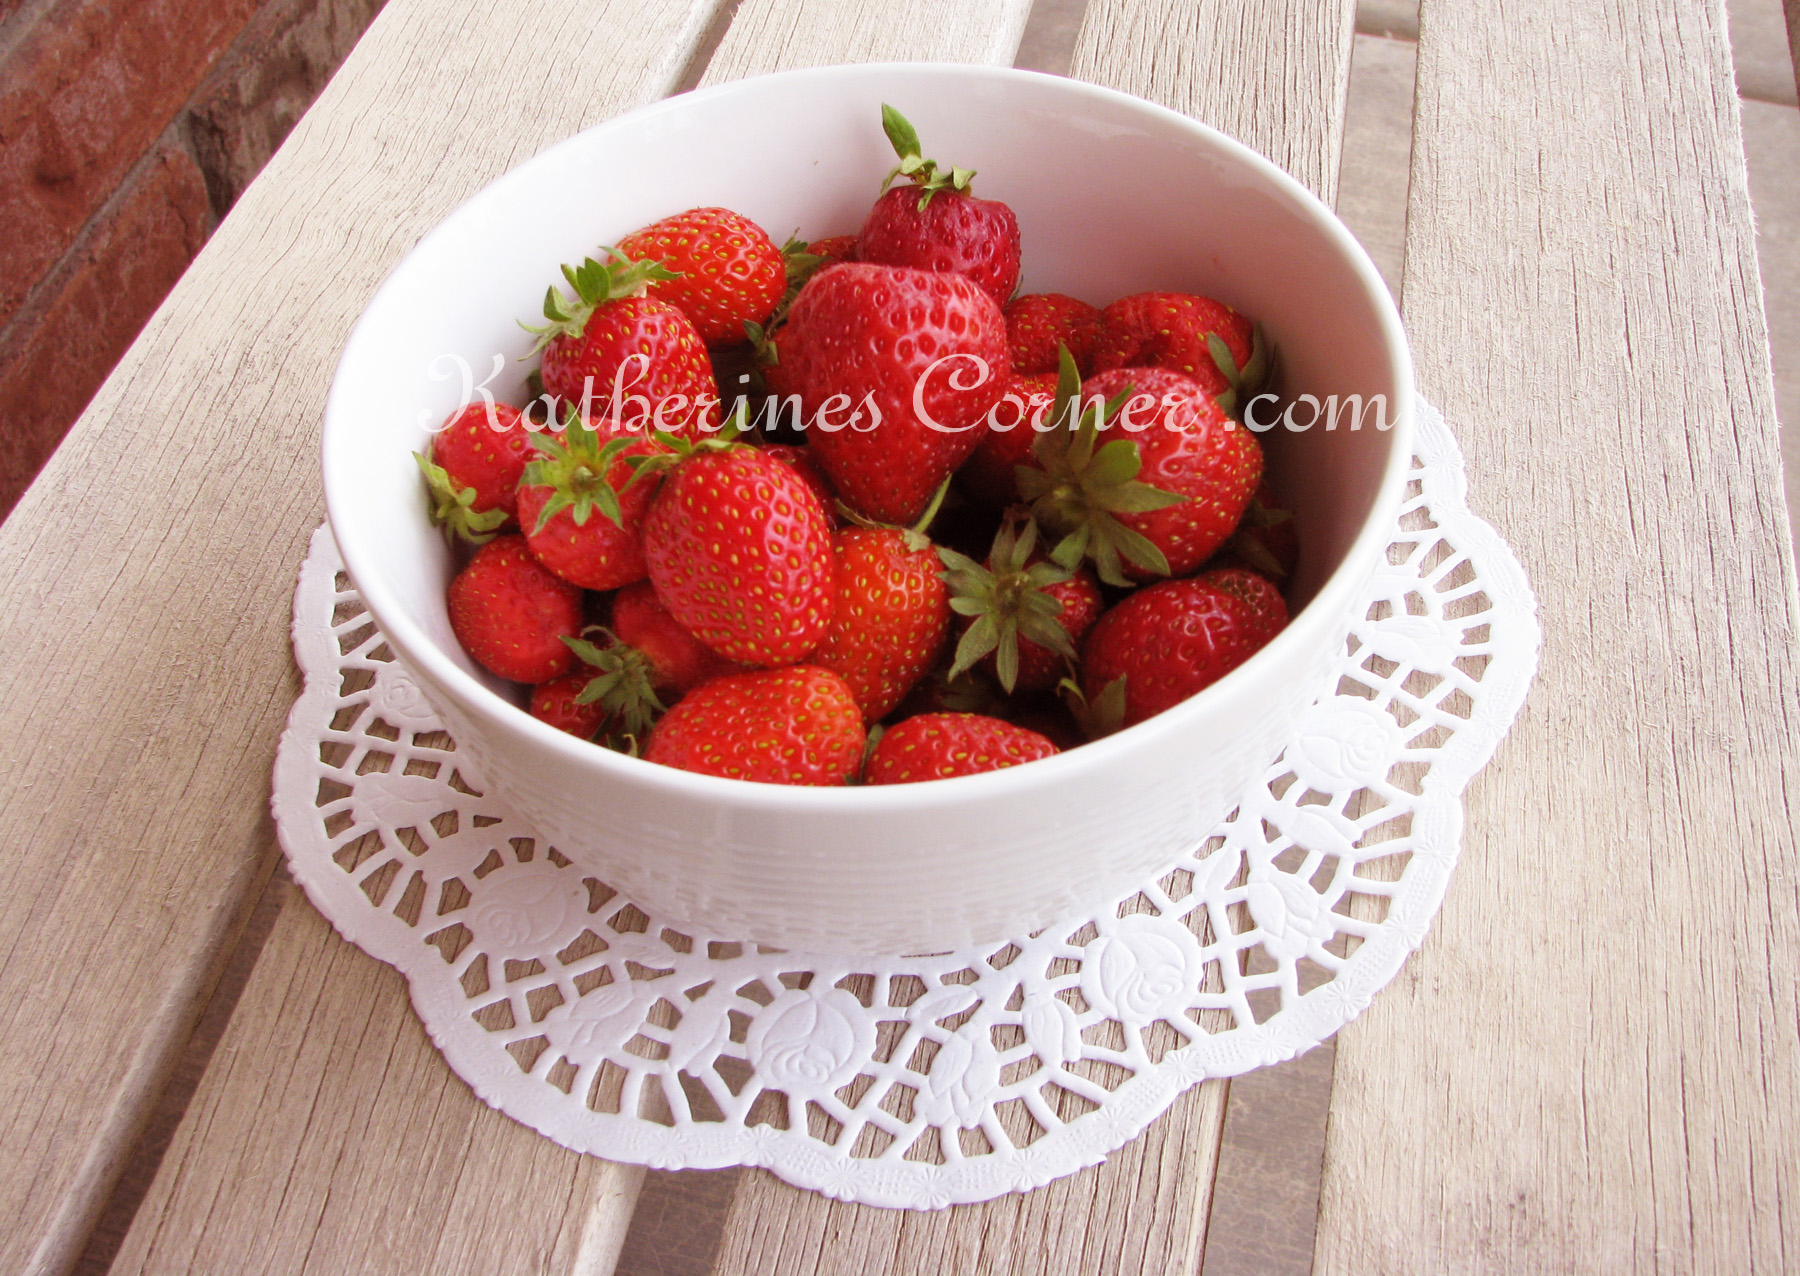 Wordless Wednesday The First Strawberries From Our Garden